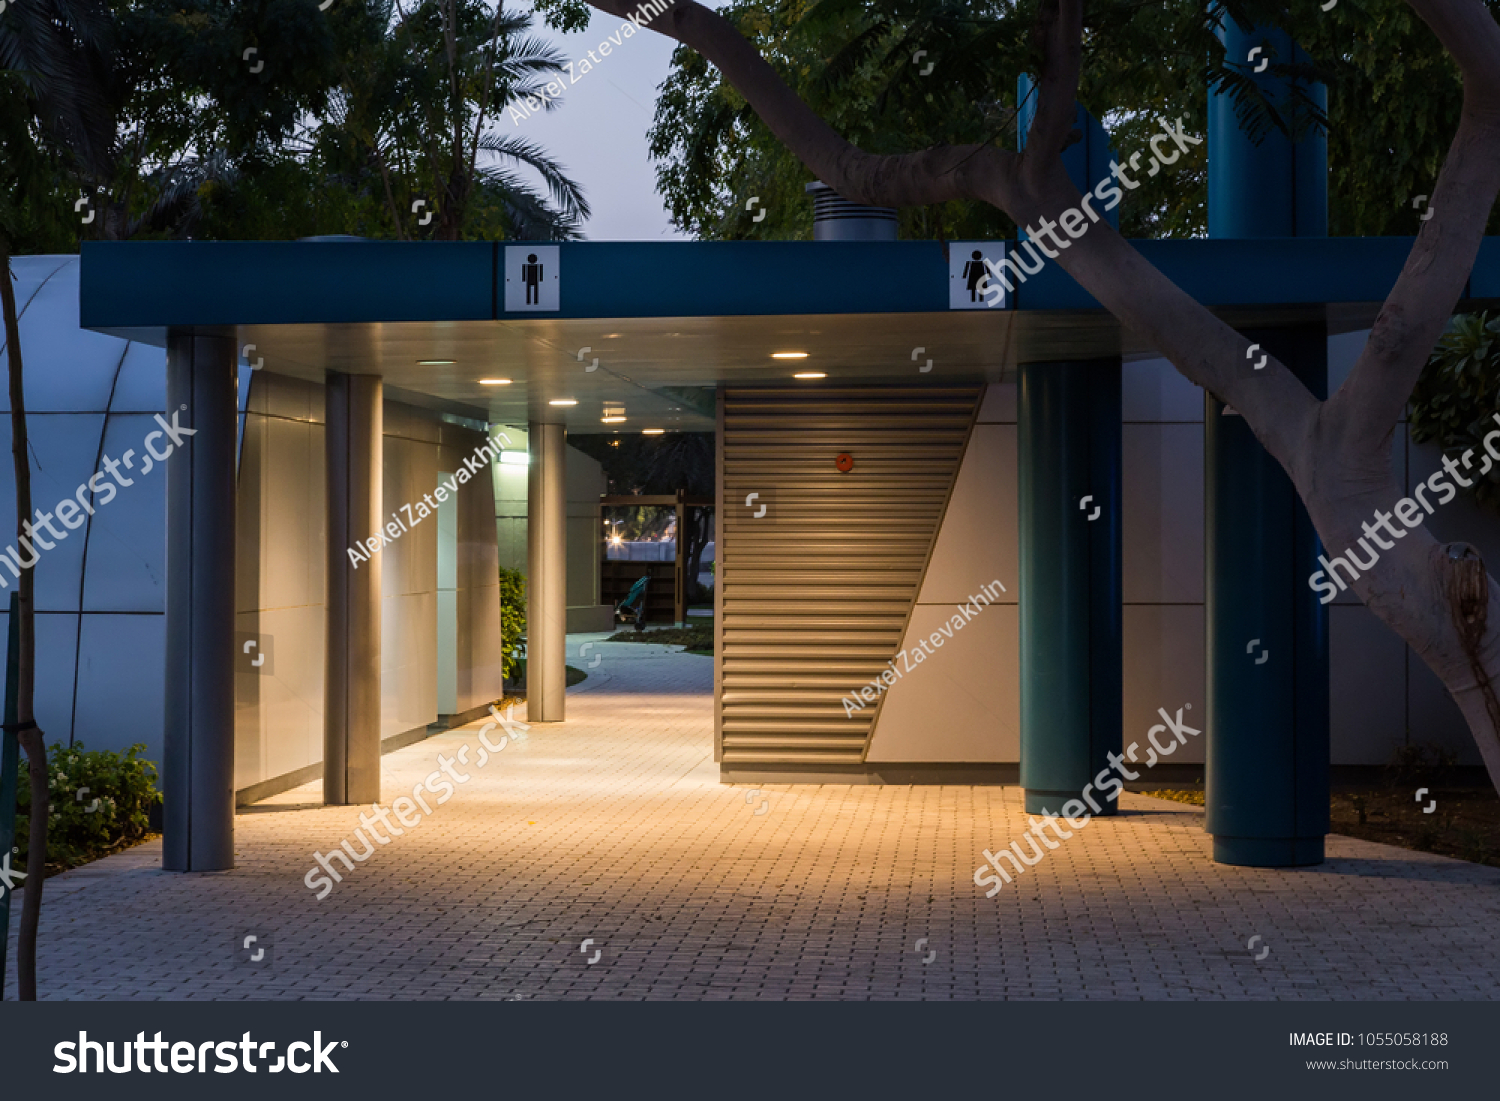 Stock Photo Public Toilet In The City Park In The Evening 1055058188 